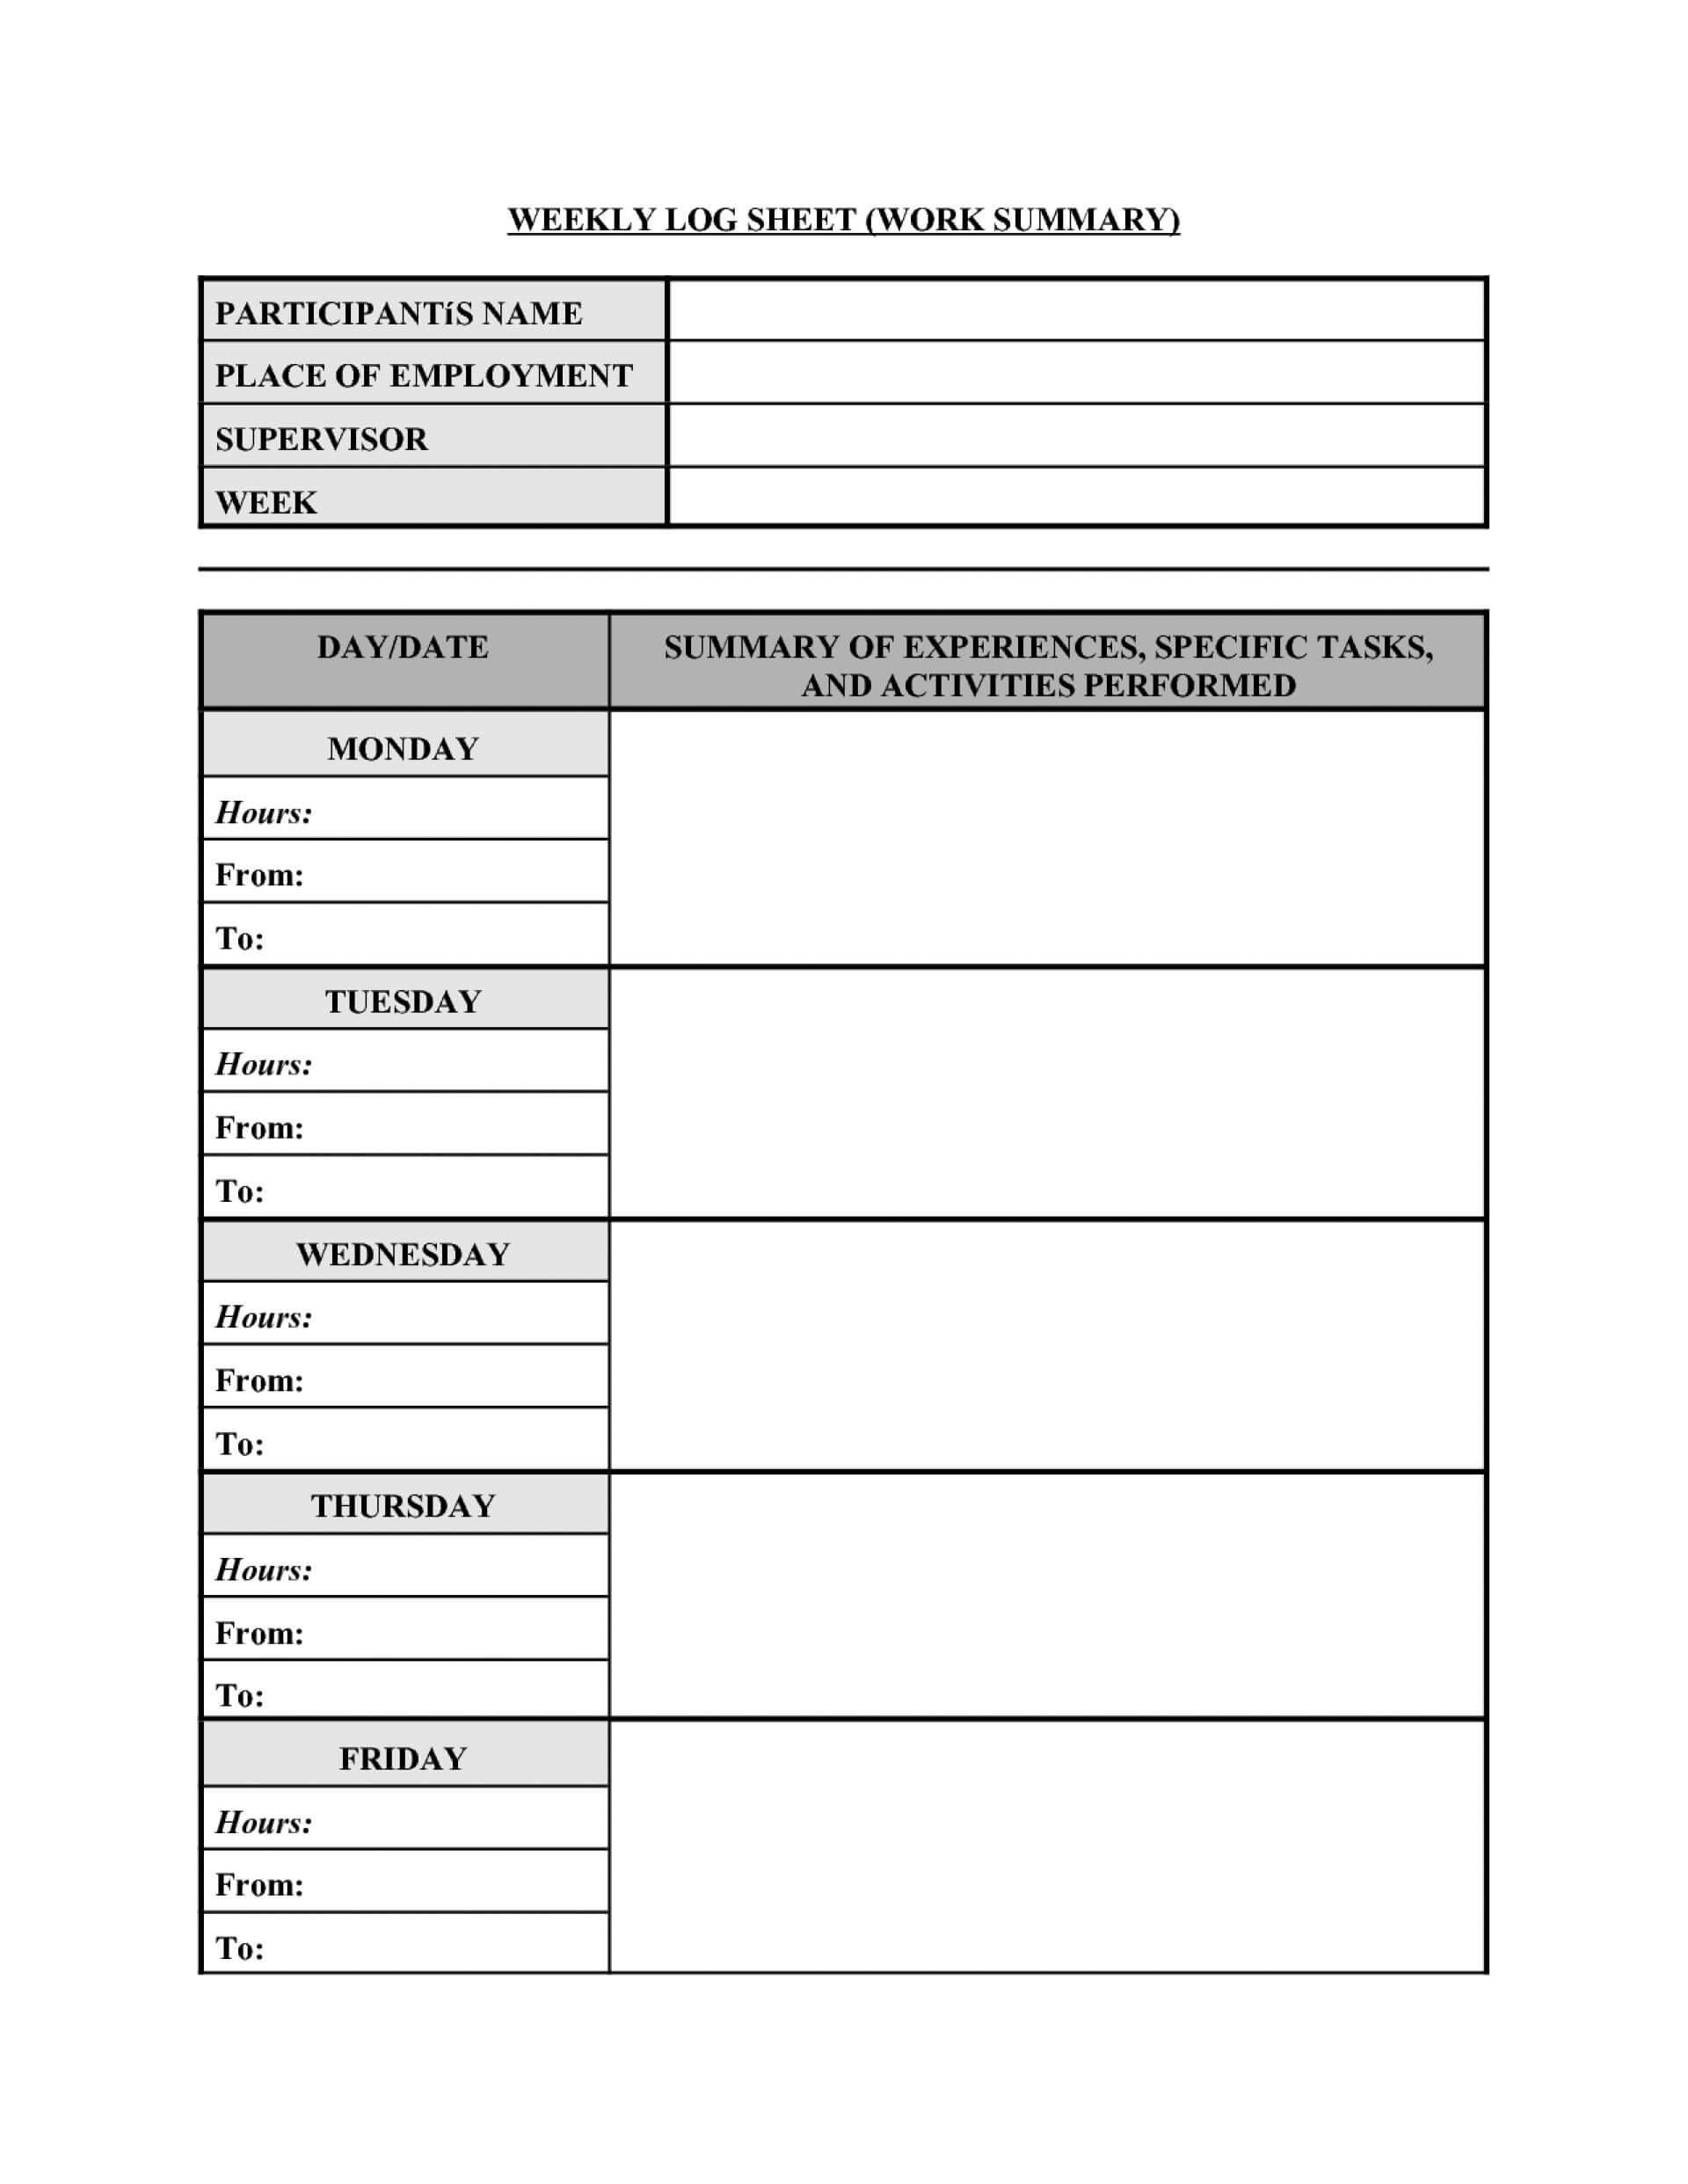 Fantastic Weekly Activities Report Template Ideas Activity In Work Summary Report Template